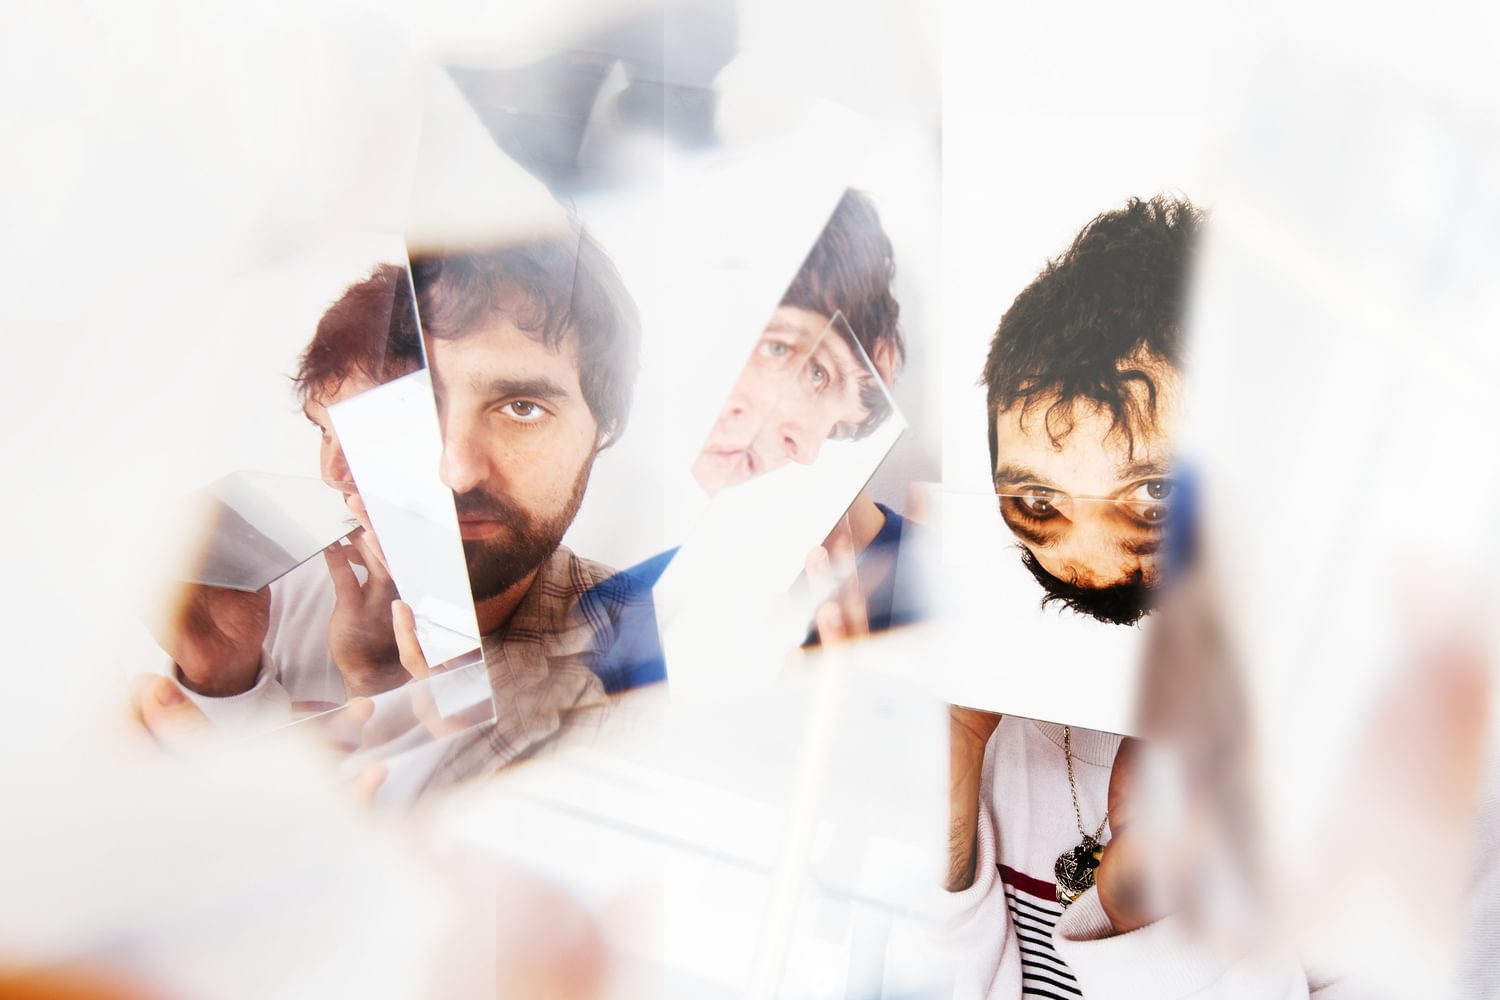 Animal Collective have aired new track ‘Kinda Bonkers’